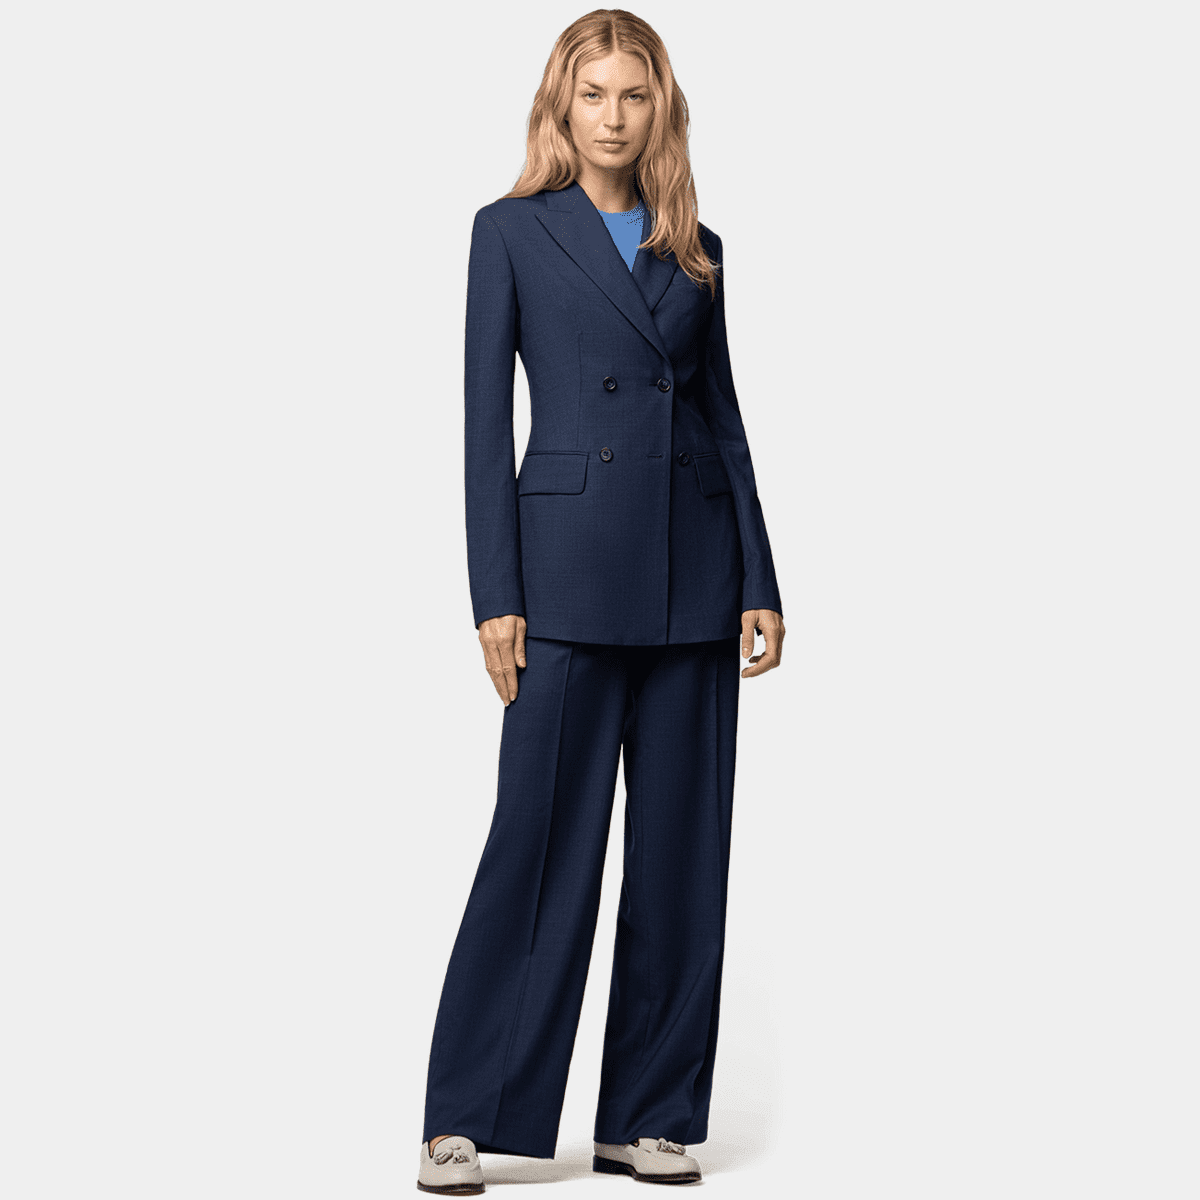 Premium Navy Blue double breasted wool Wide Leg Pant Suit - relaxed fit